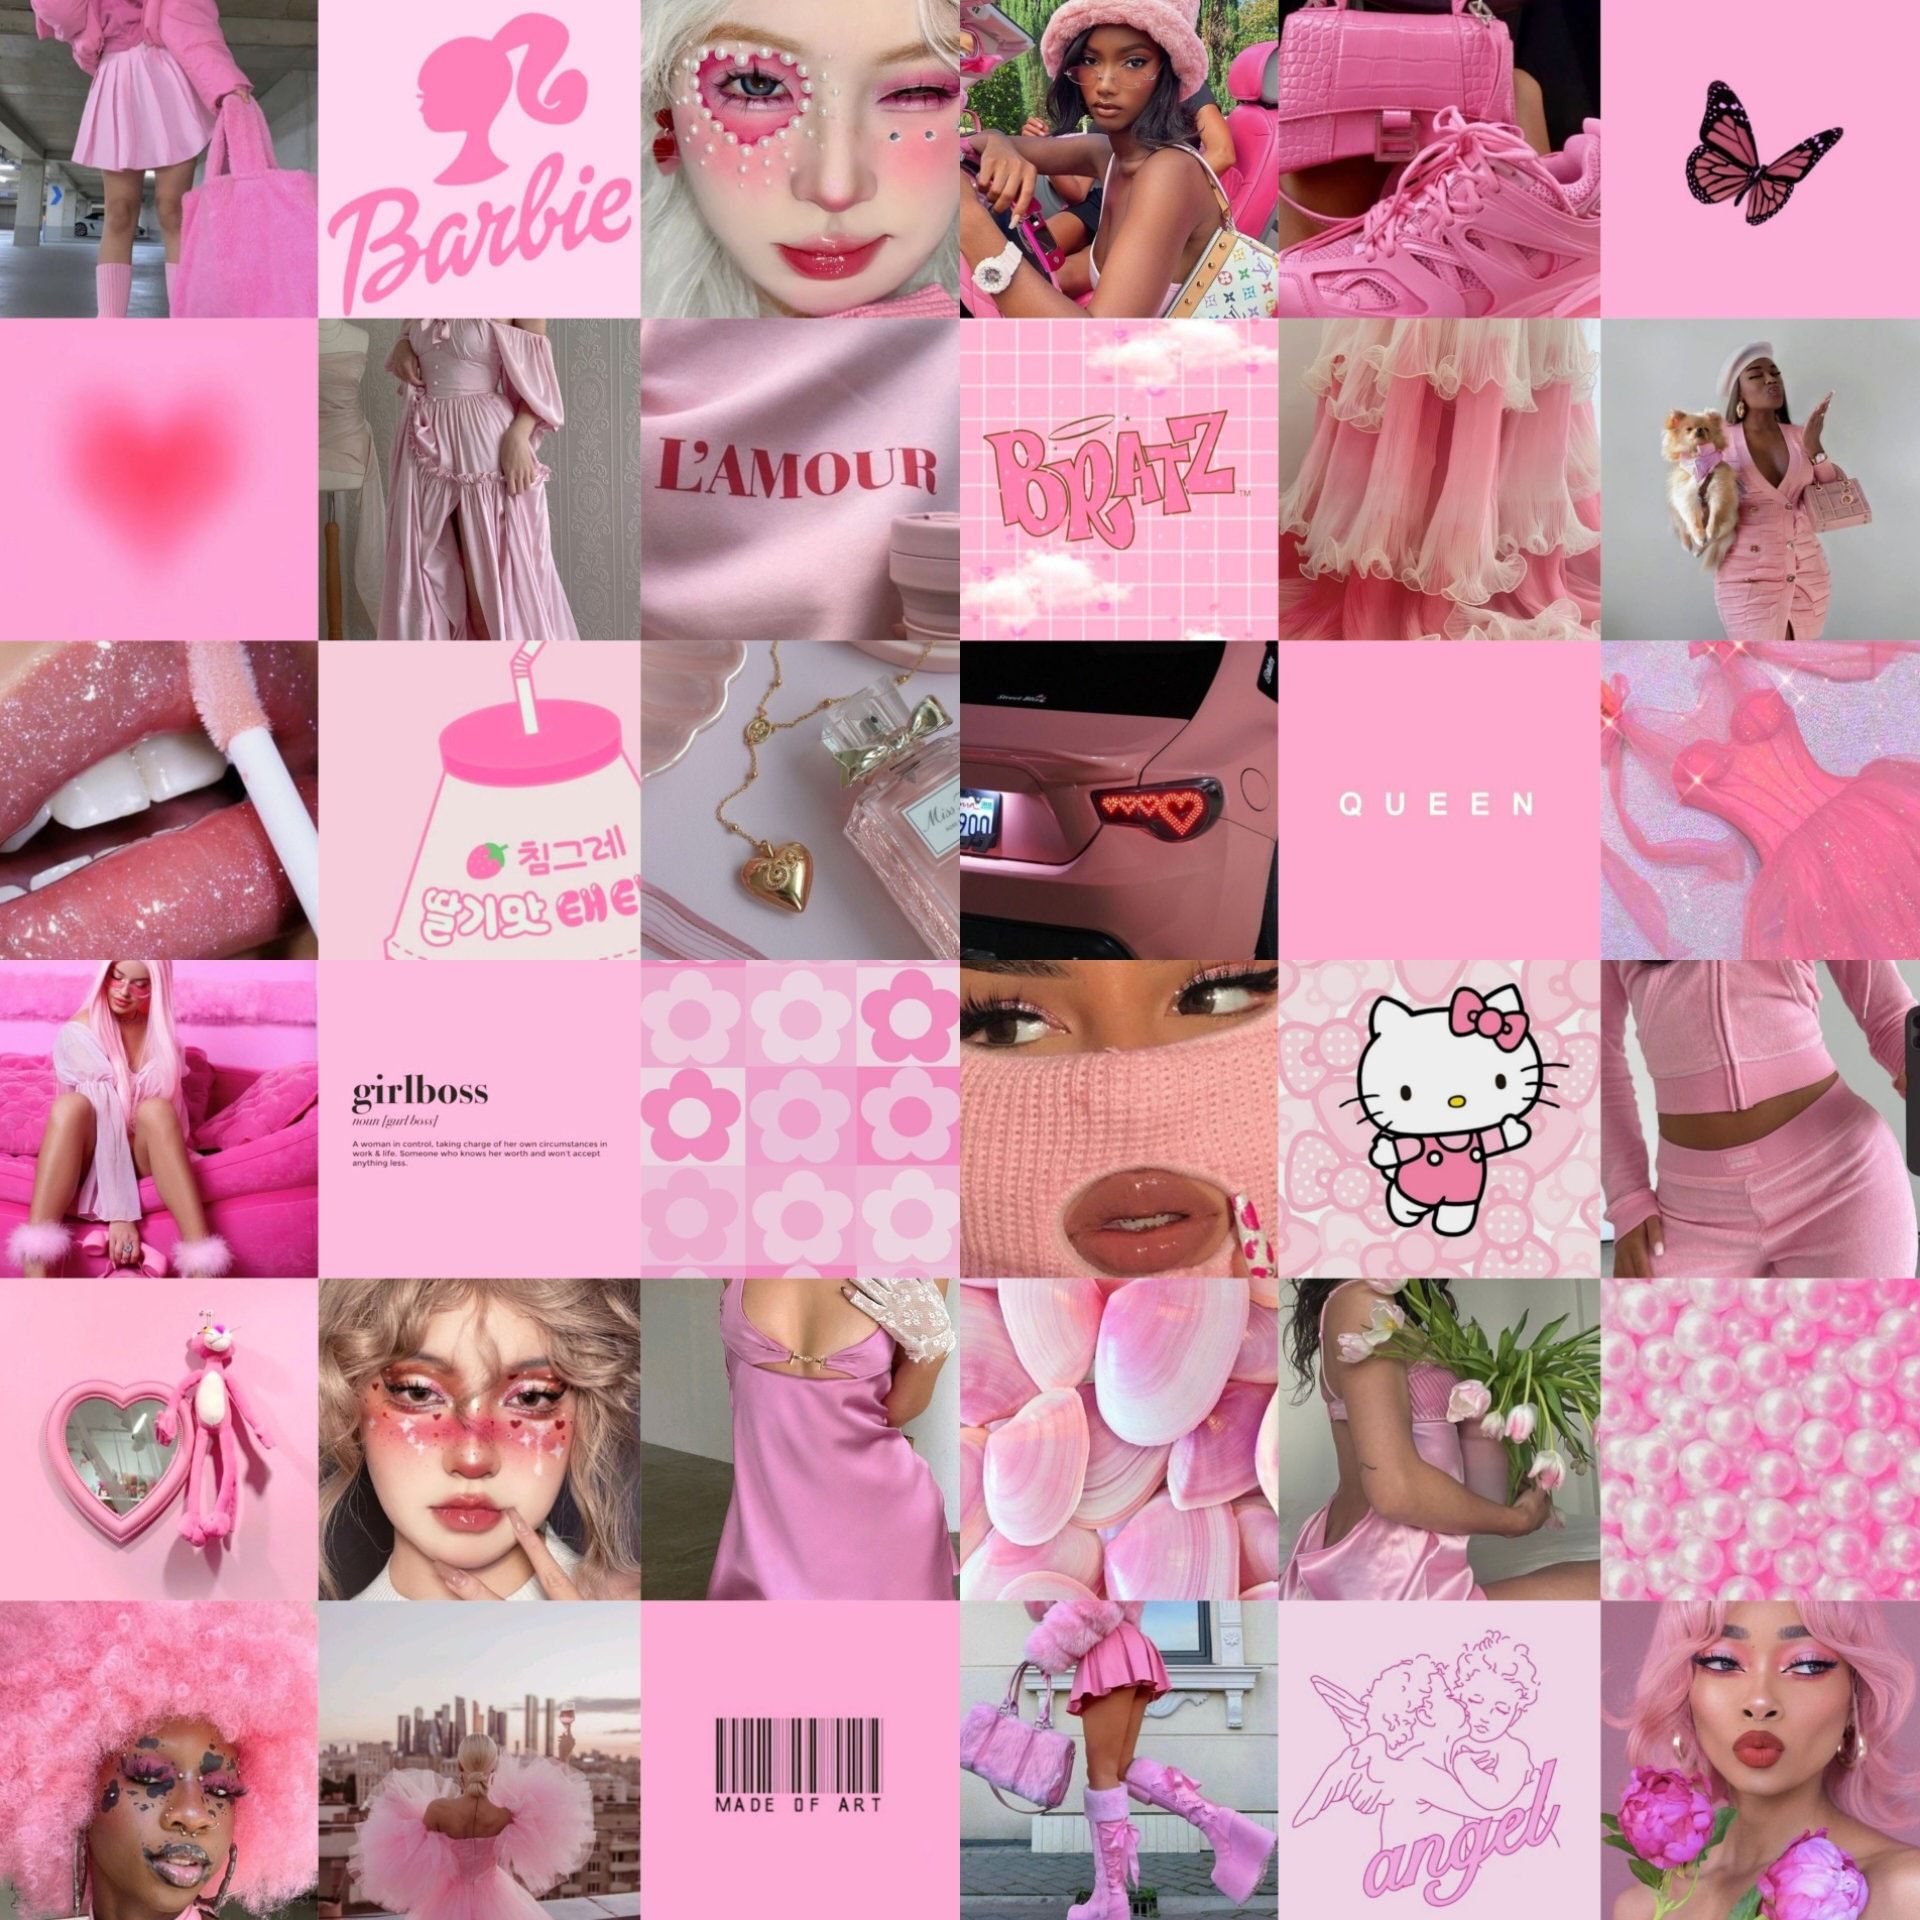 A collage of pink aesthetic images including barbies, butterflies, and pink flowers. - Barbie, pink, pink collage